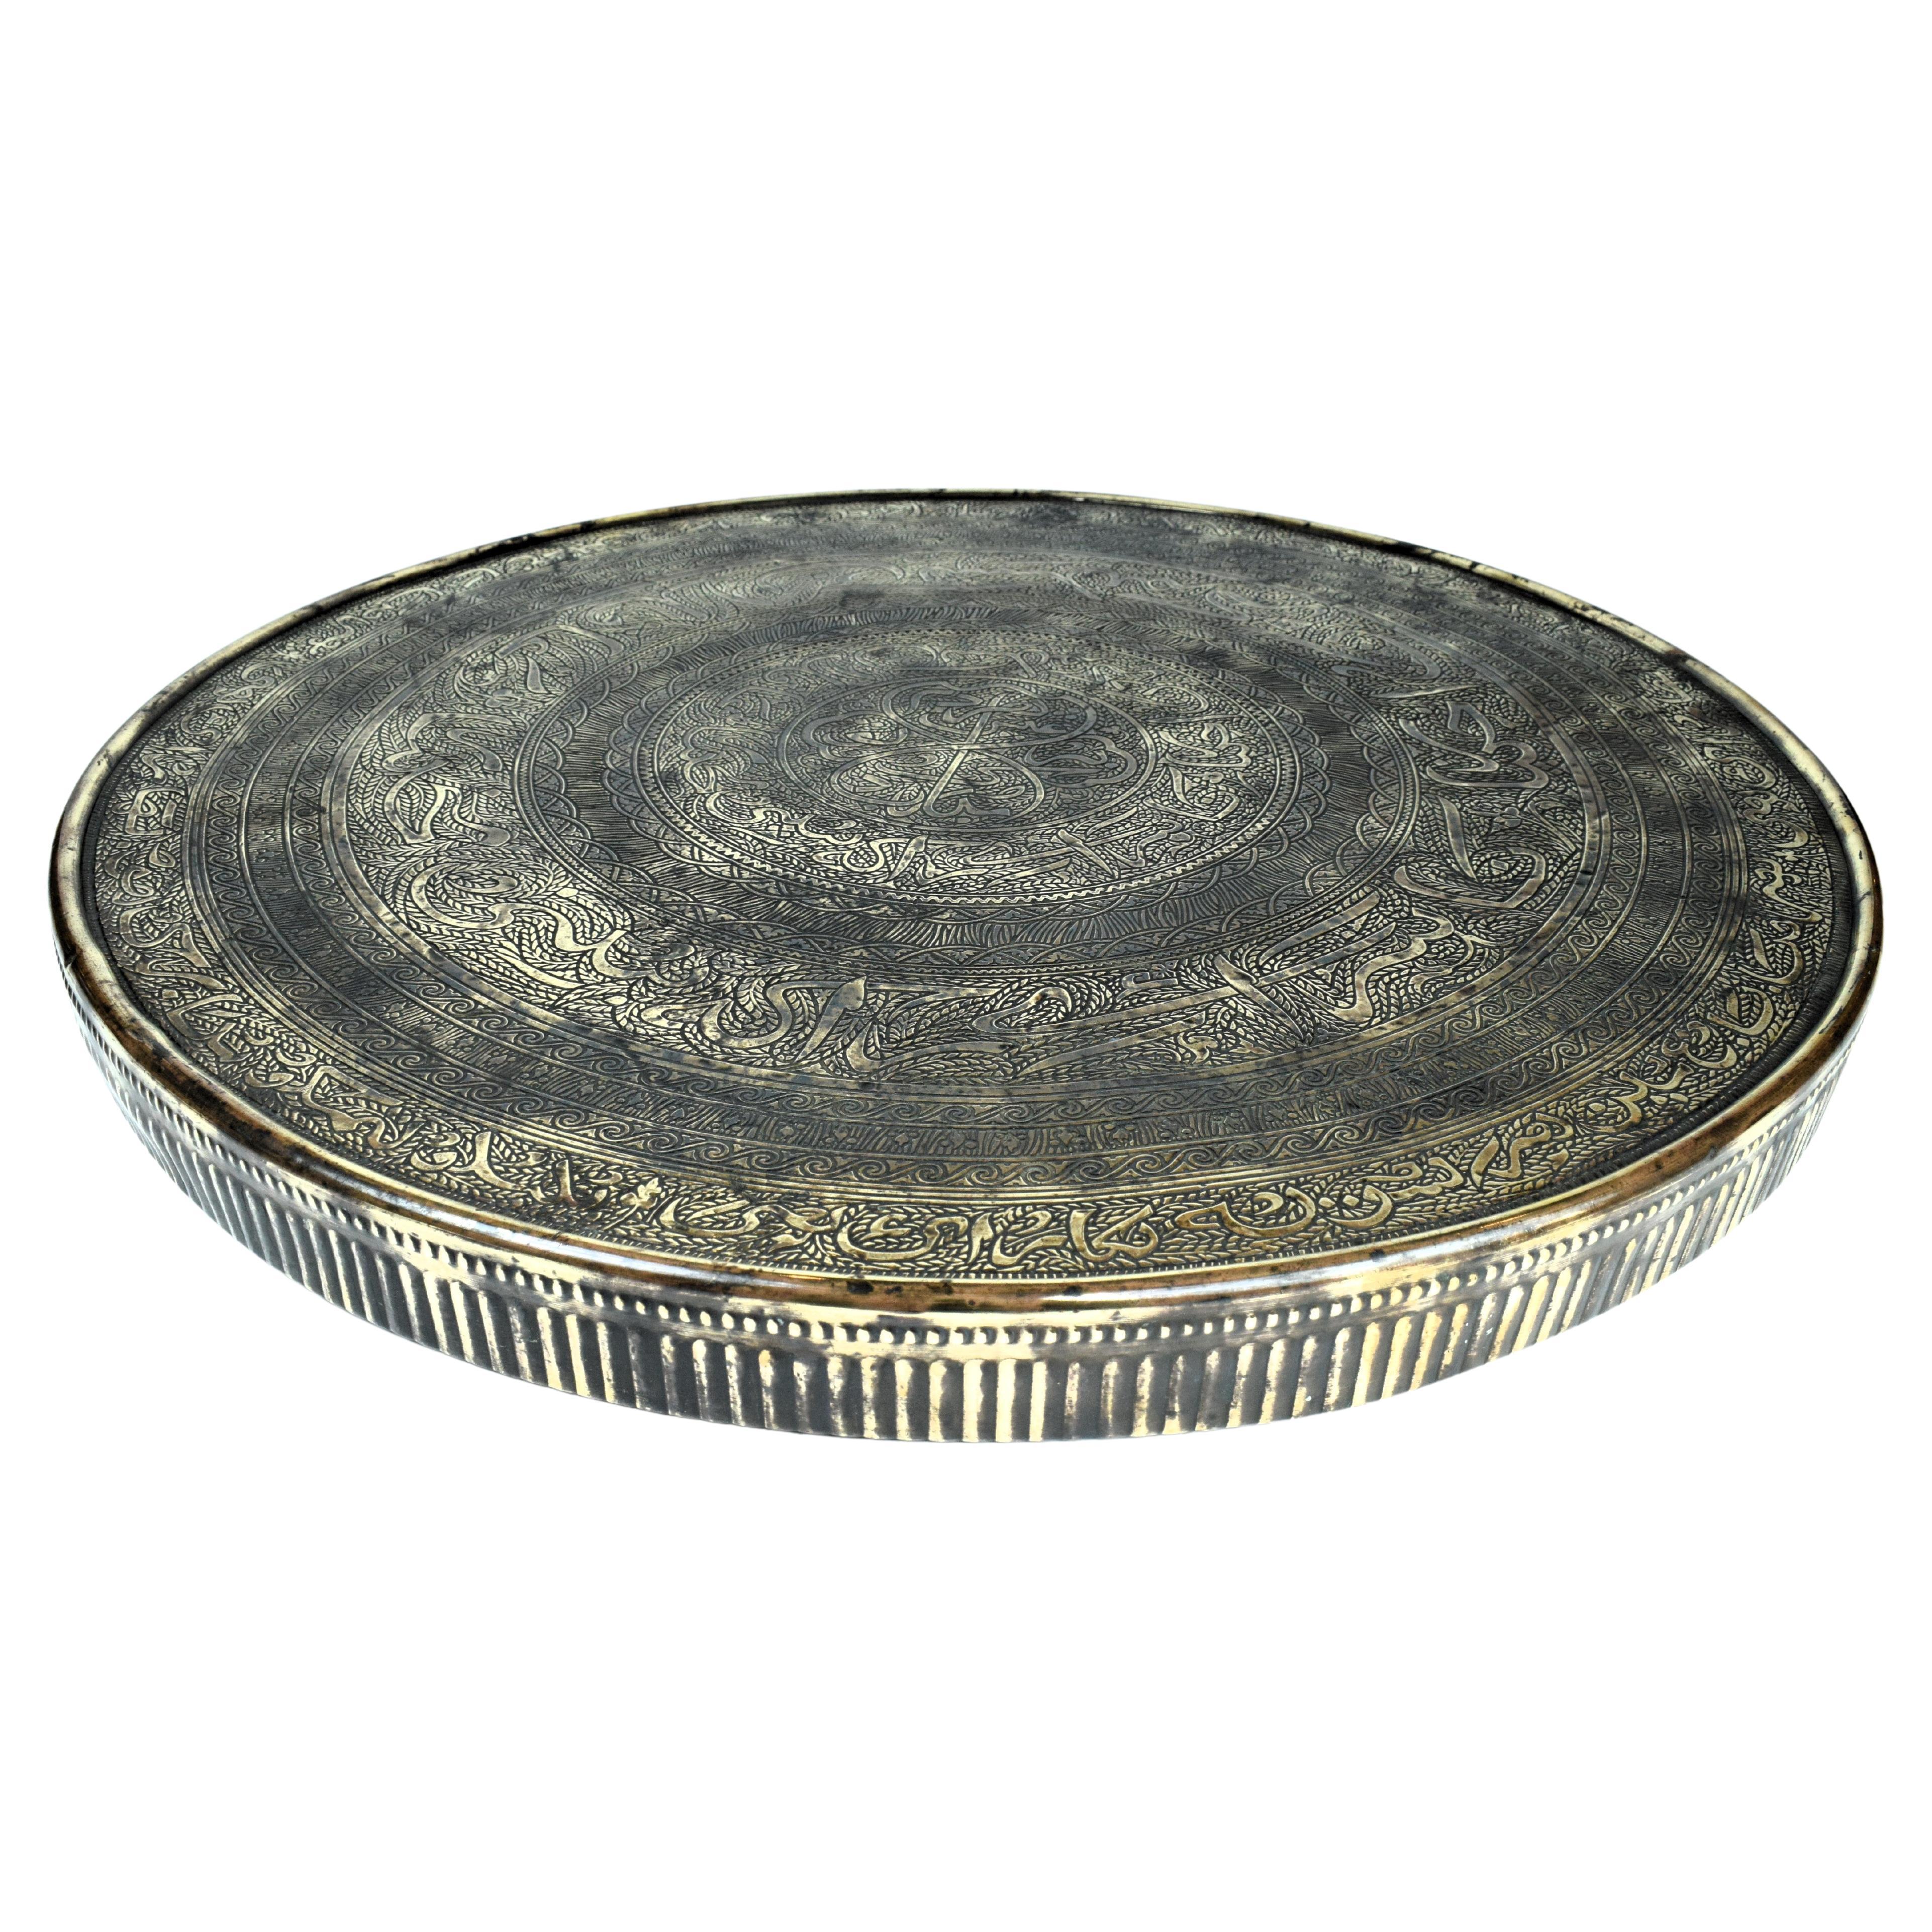 The Persian brass round platter from the early 20th century is a stunning example of Persian metalwork, showcasing a fusion of calligraphic and geometrical engravings. This platter crafted by skilled artisans, reflects the cultural and artistic